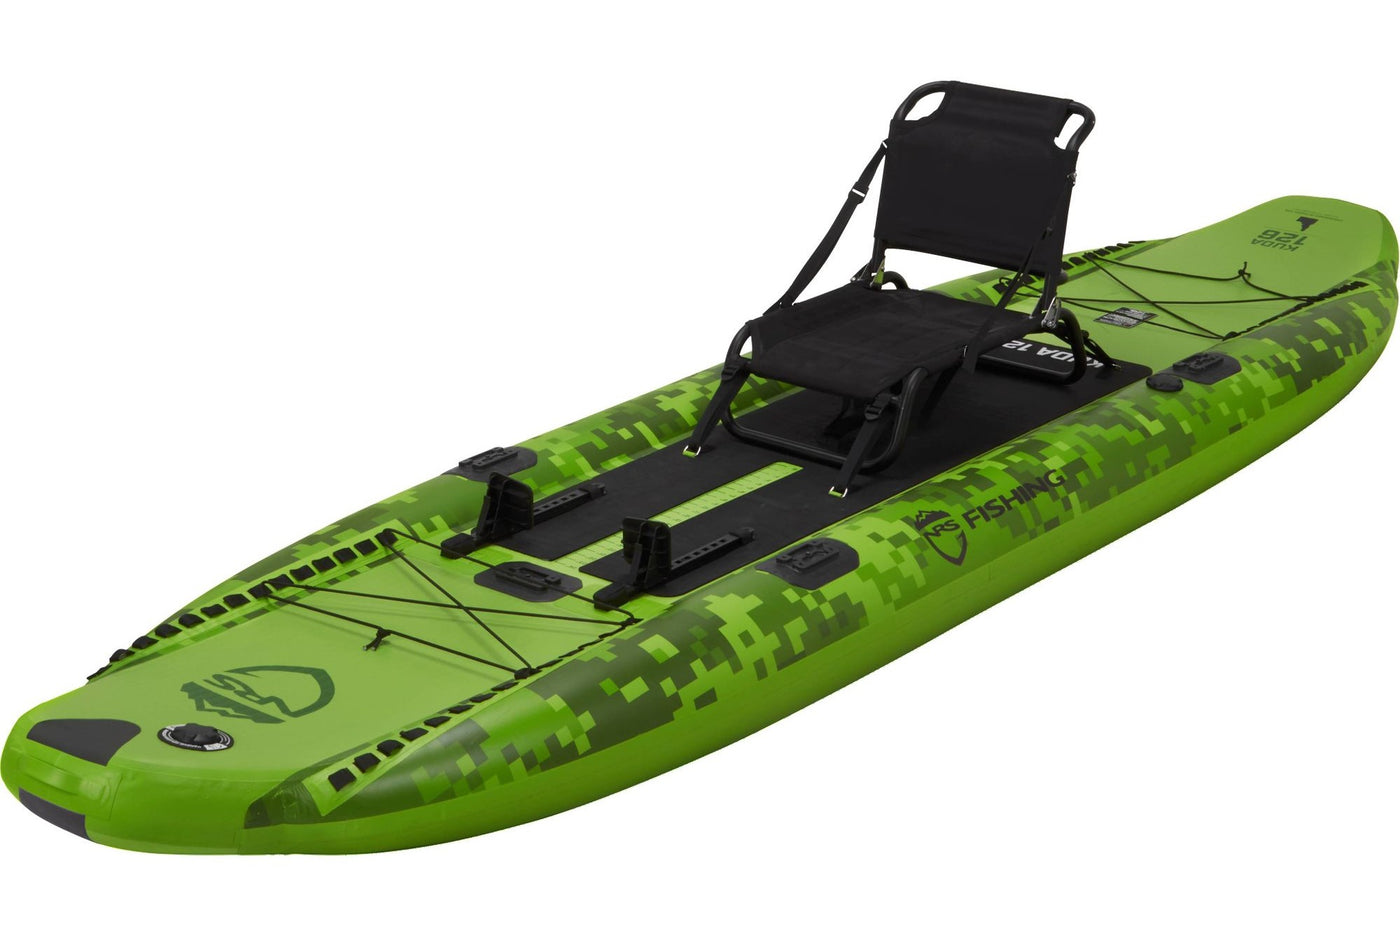 NRS Kuda Inflatable Sit-On-Top Kayak Lime, 12ft 6in